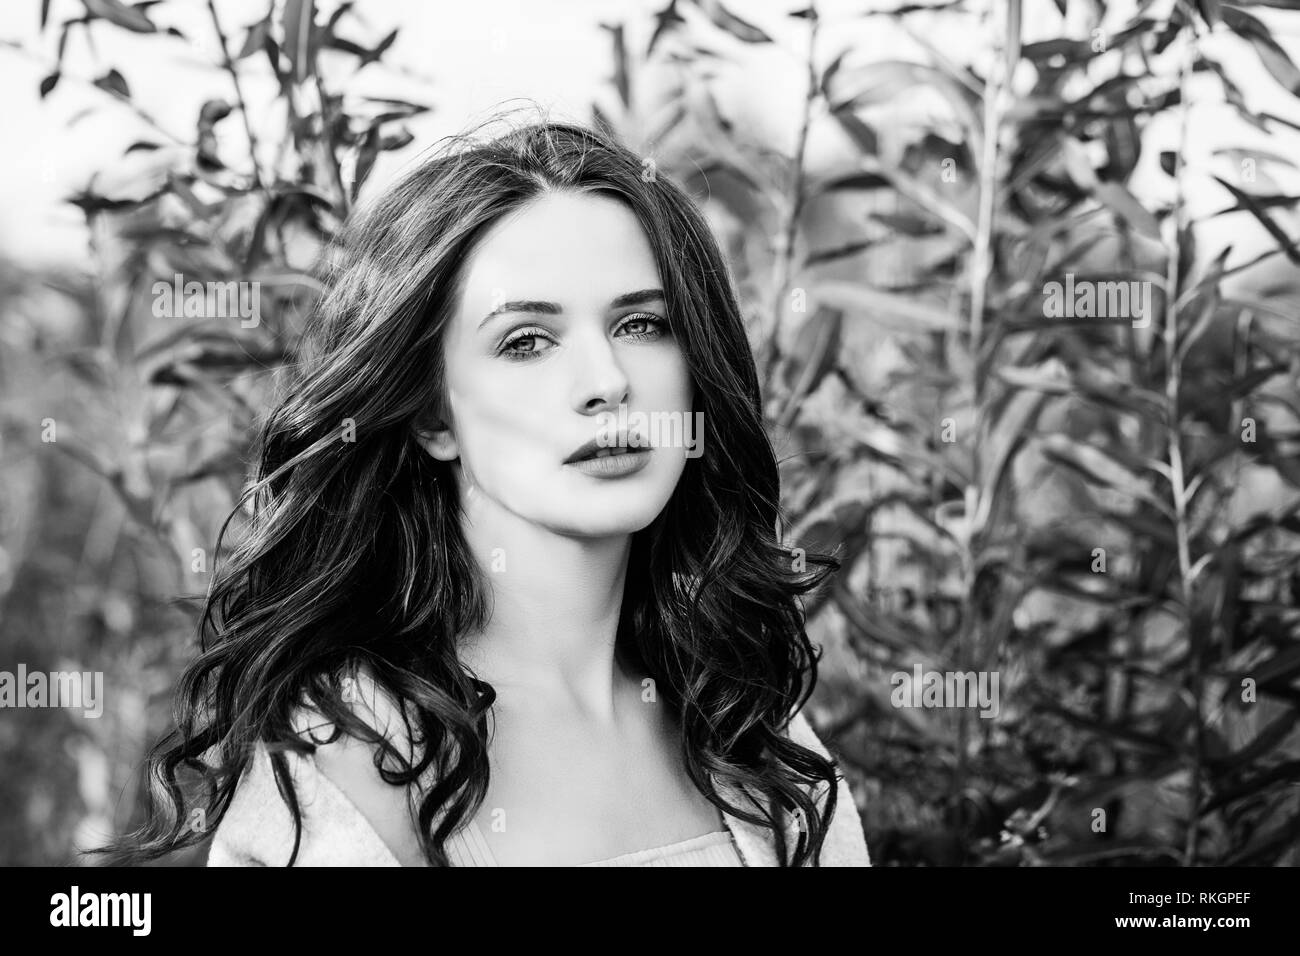 Black and white outdoors portrait of perfect young woman Stock Photo